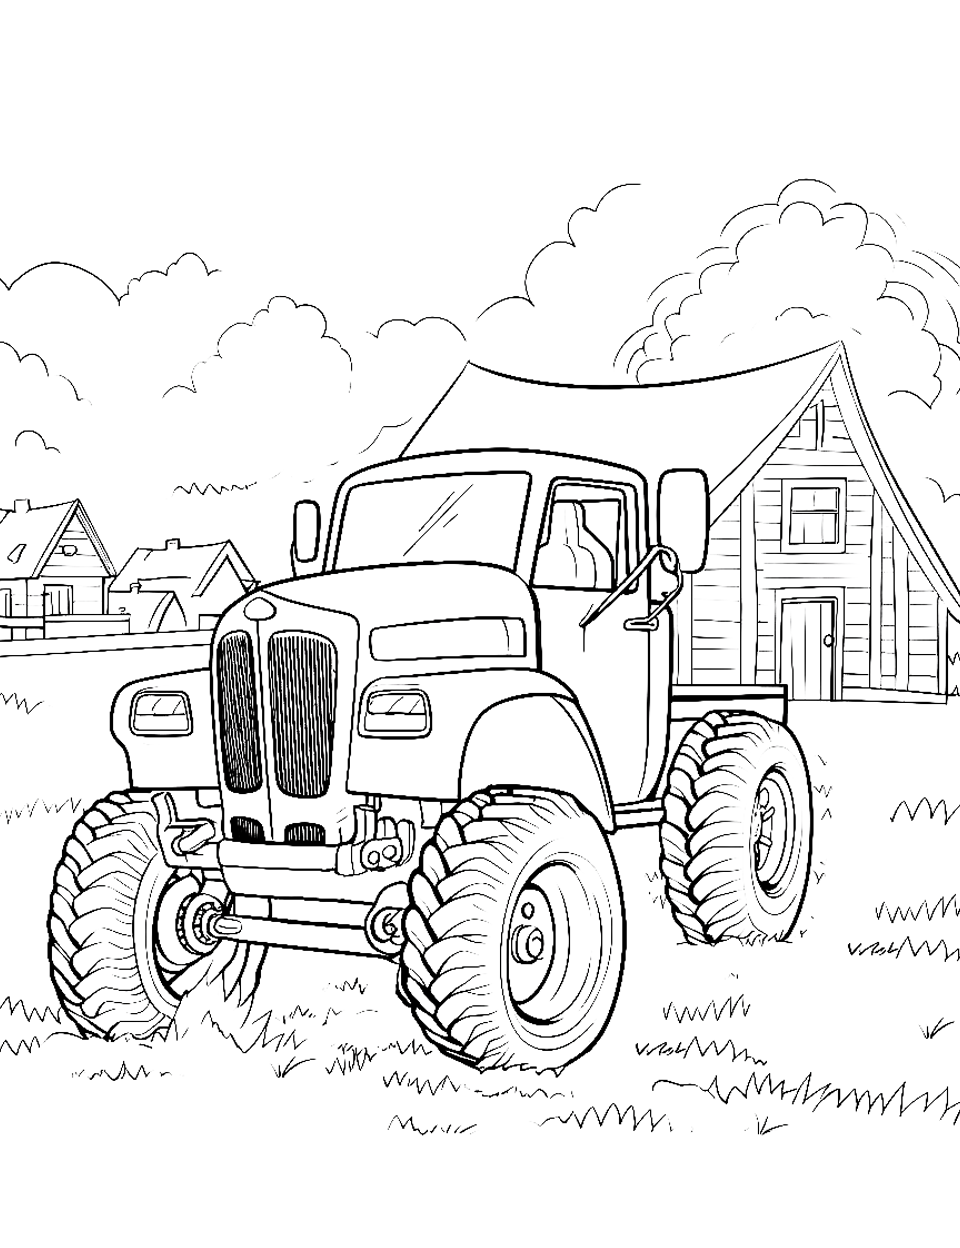 Farmyard Monster Truck Coloring Page - A farm-style monster truck working on a farm.